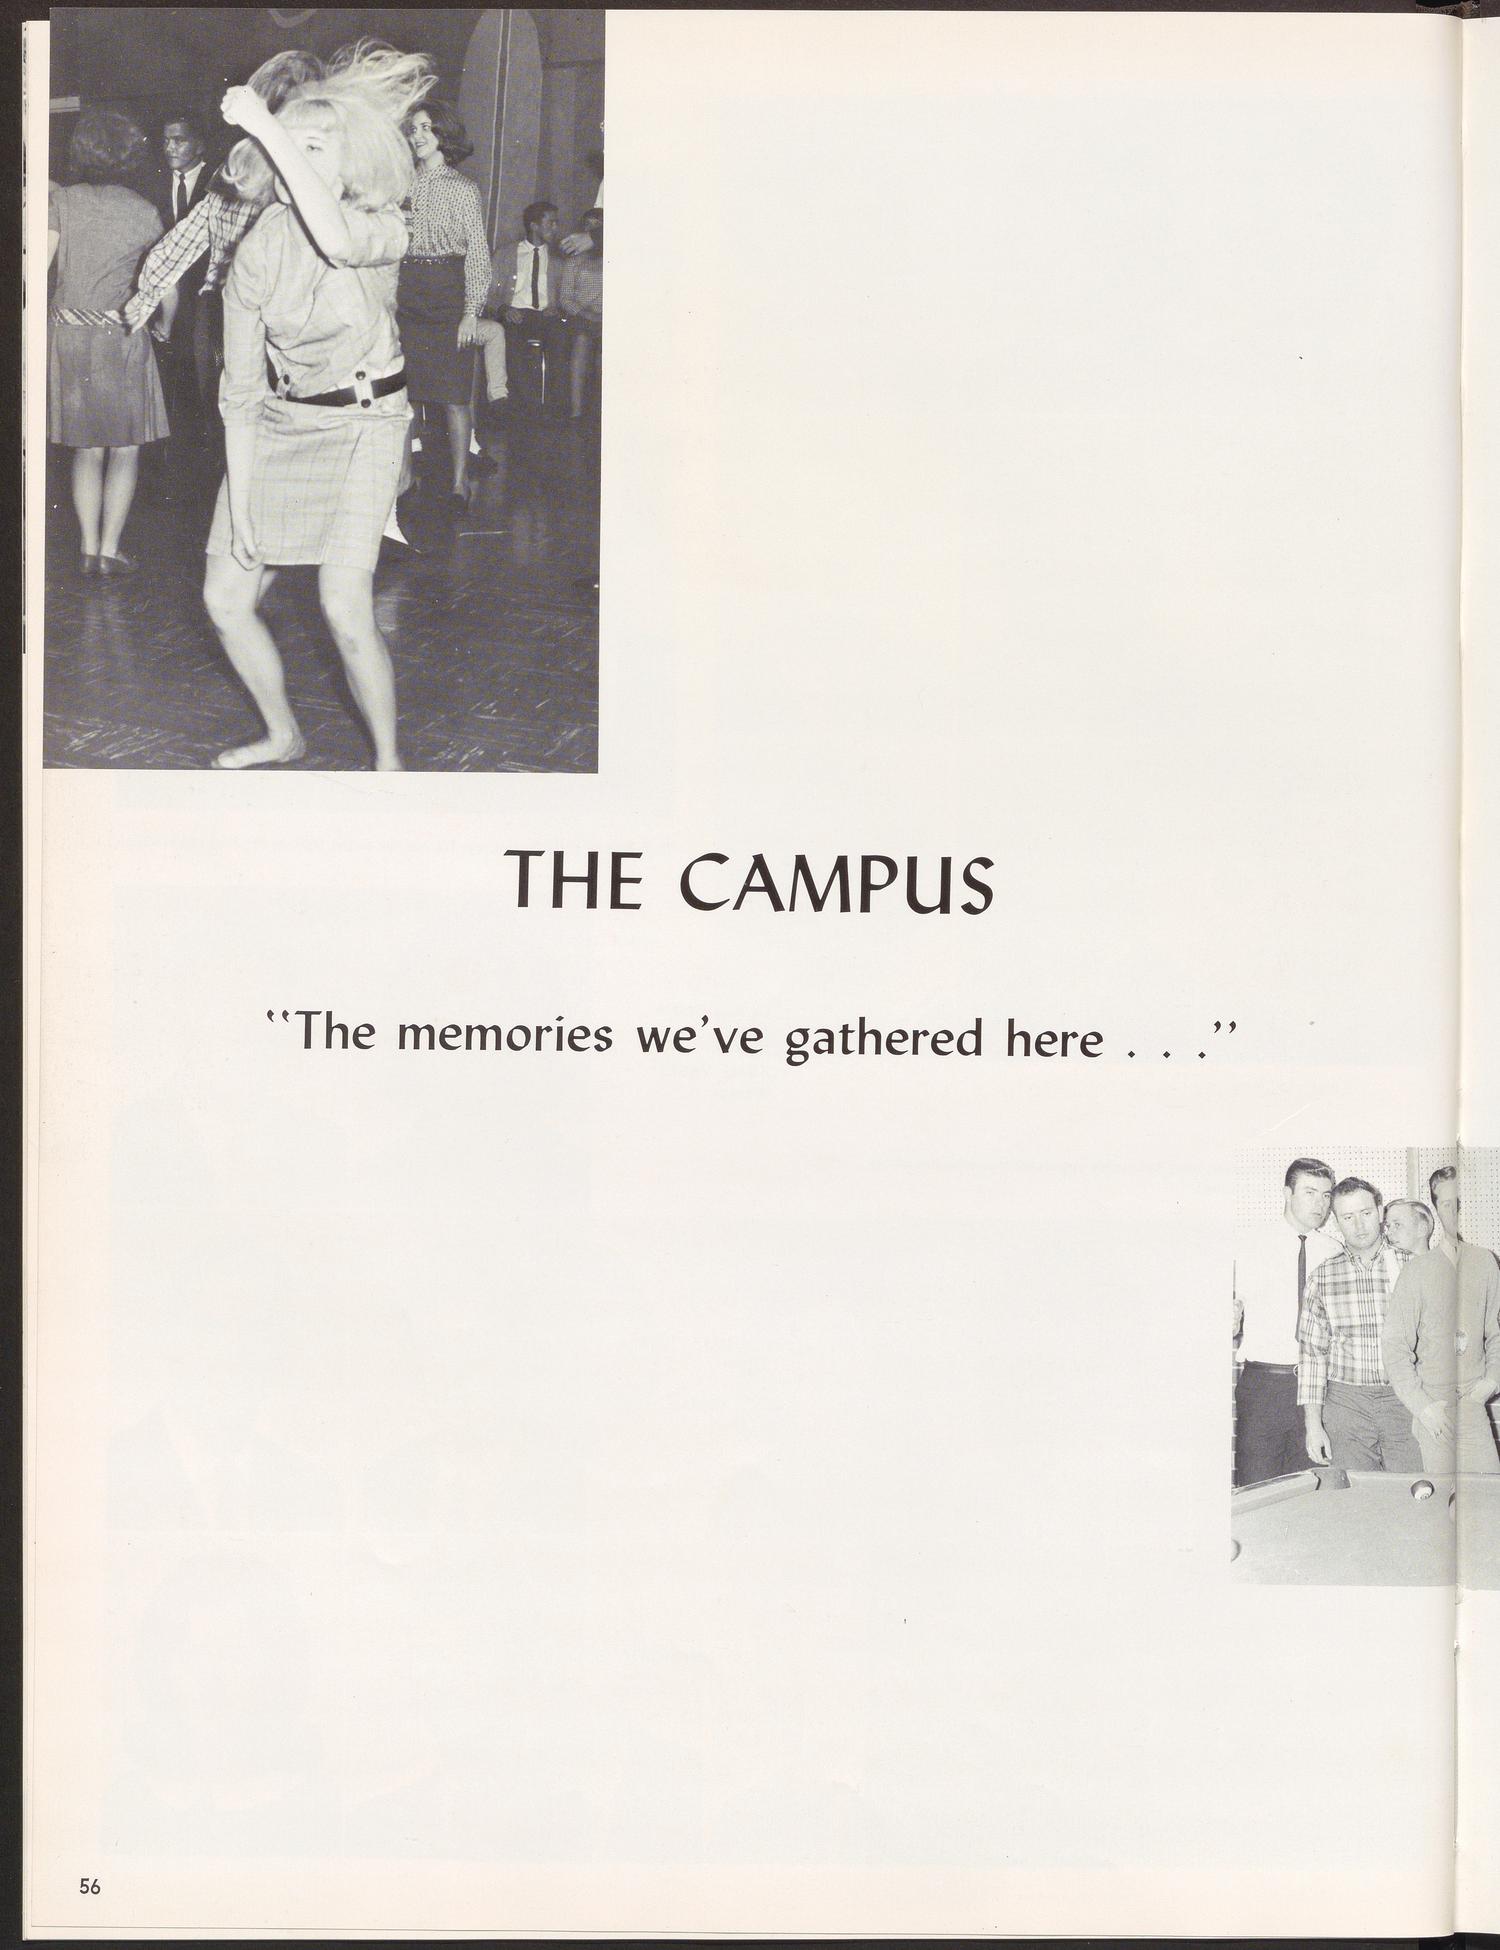 The Growl, Yearbook of Texas Lutheran College: 1966
                                                
                                                    56
                                                